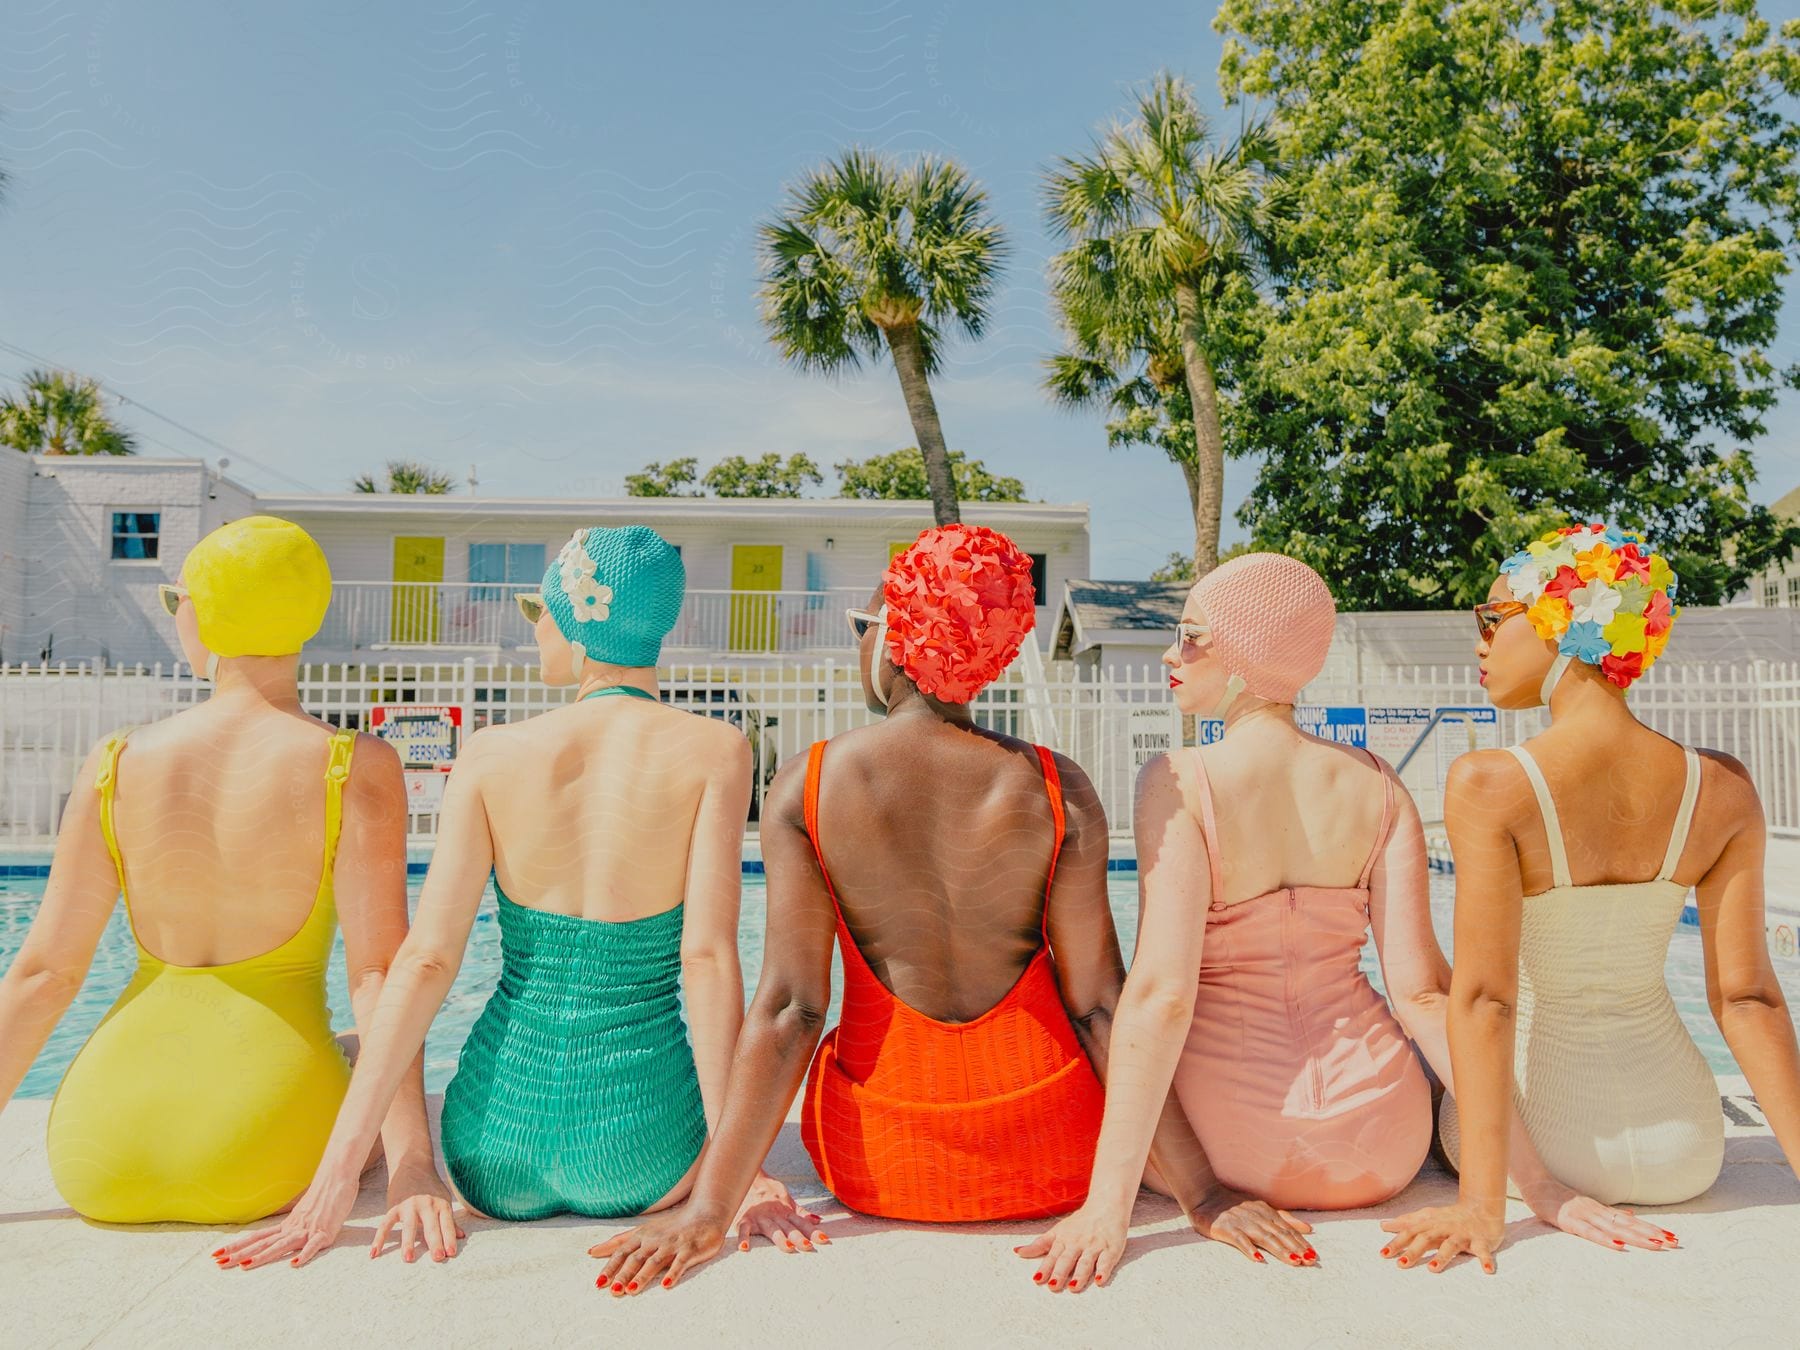 Five models wear bright-colored swimsuits while sitting next to each other poolside.